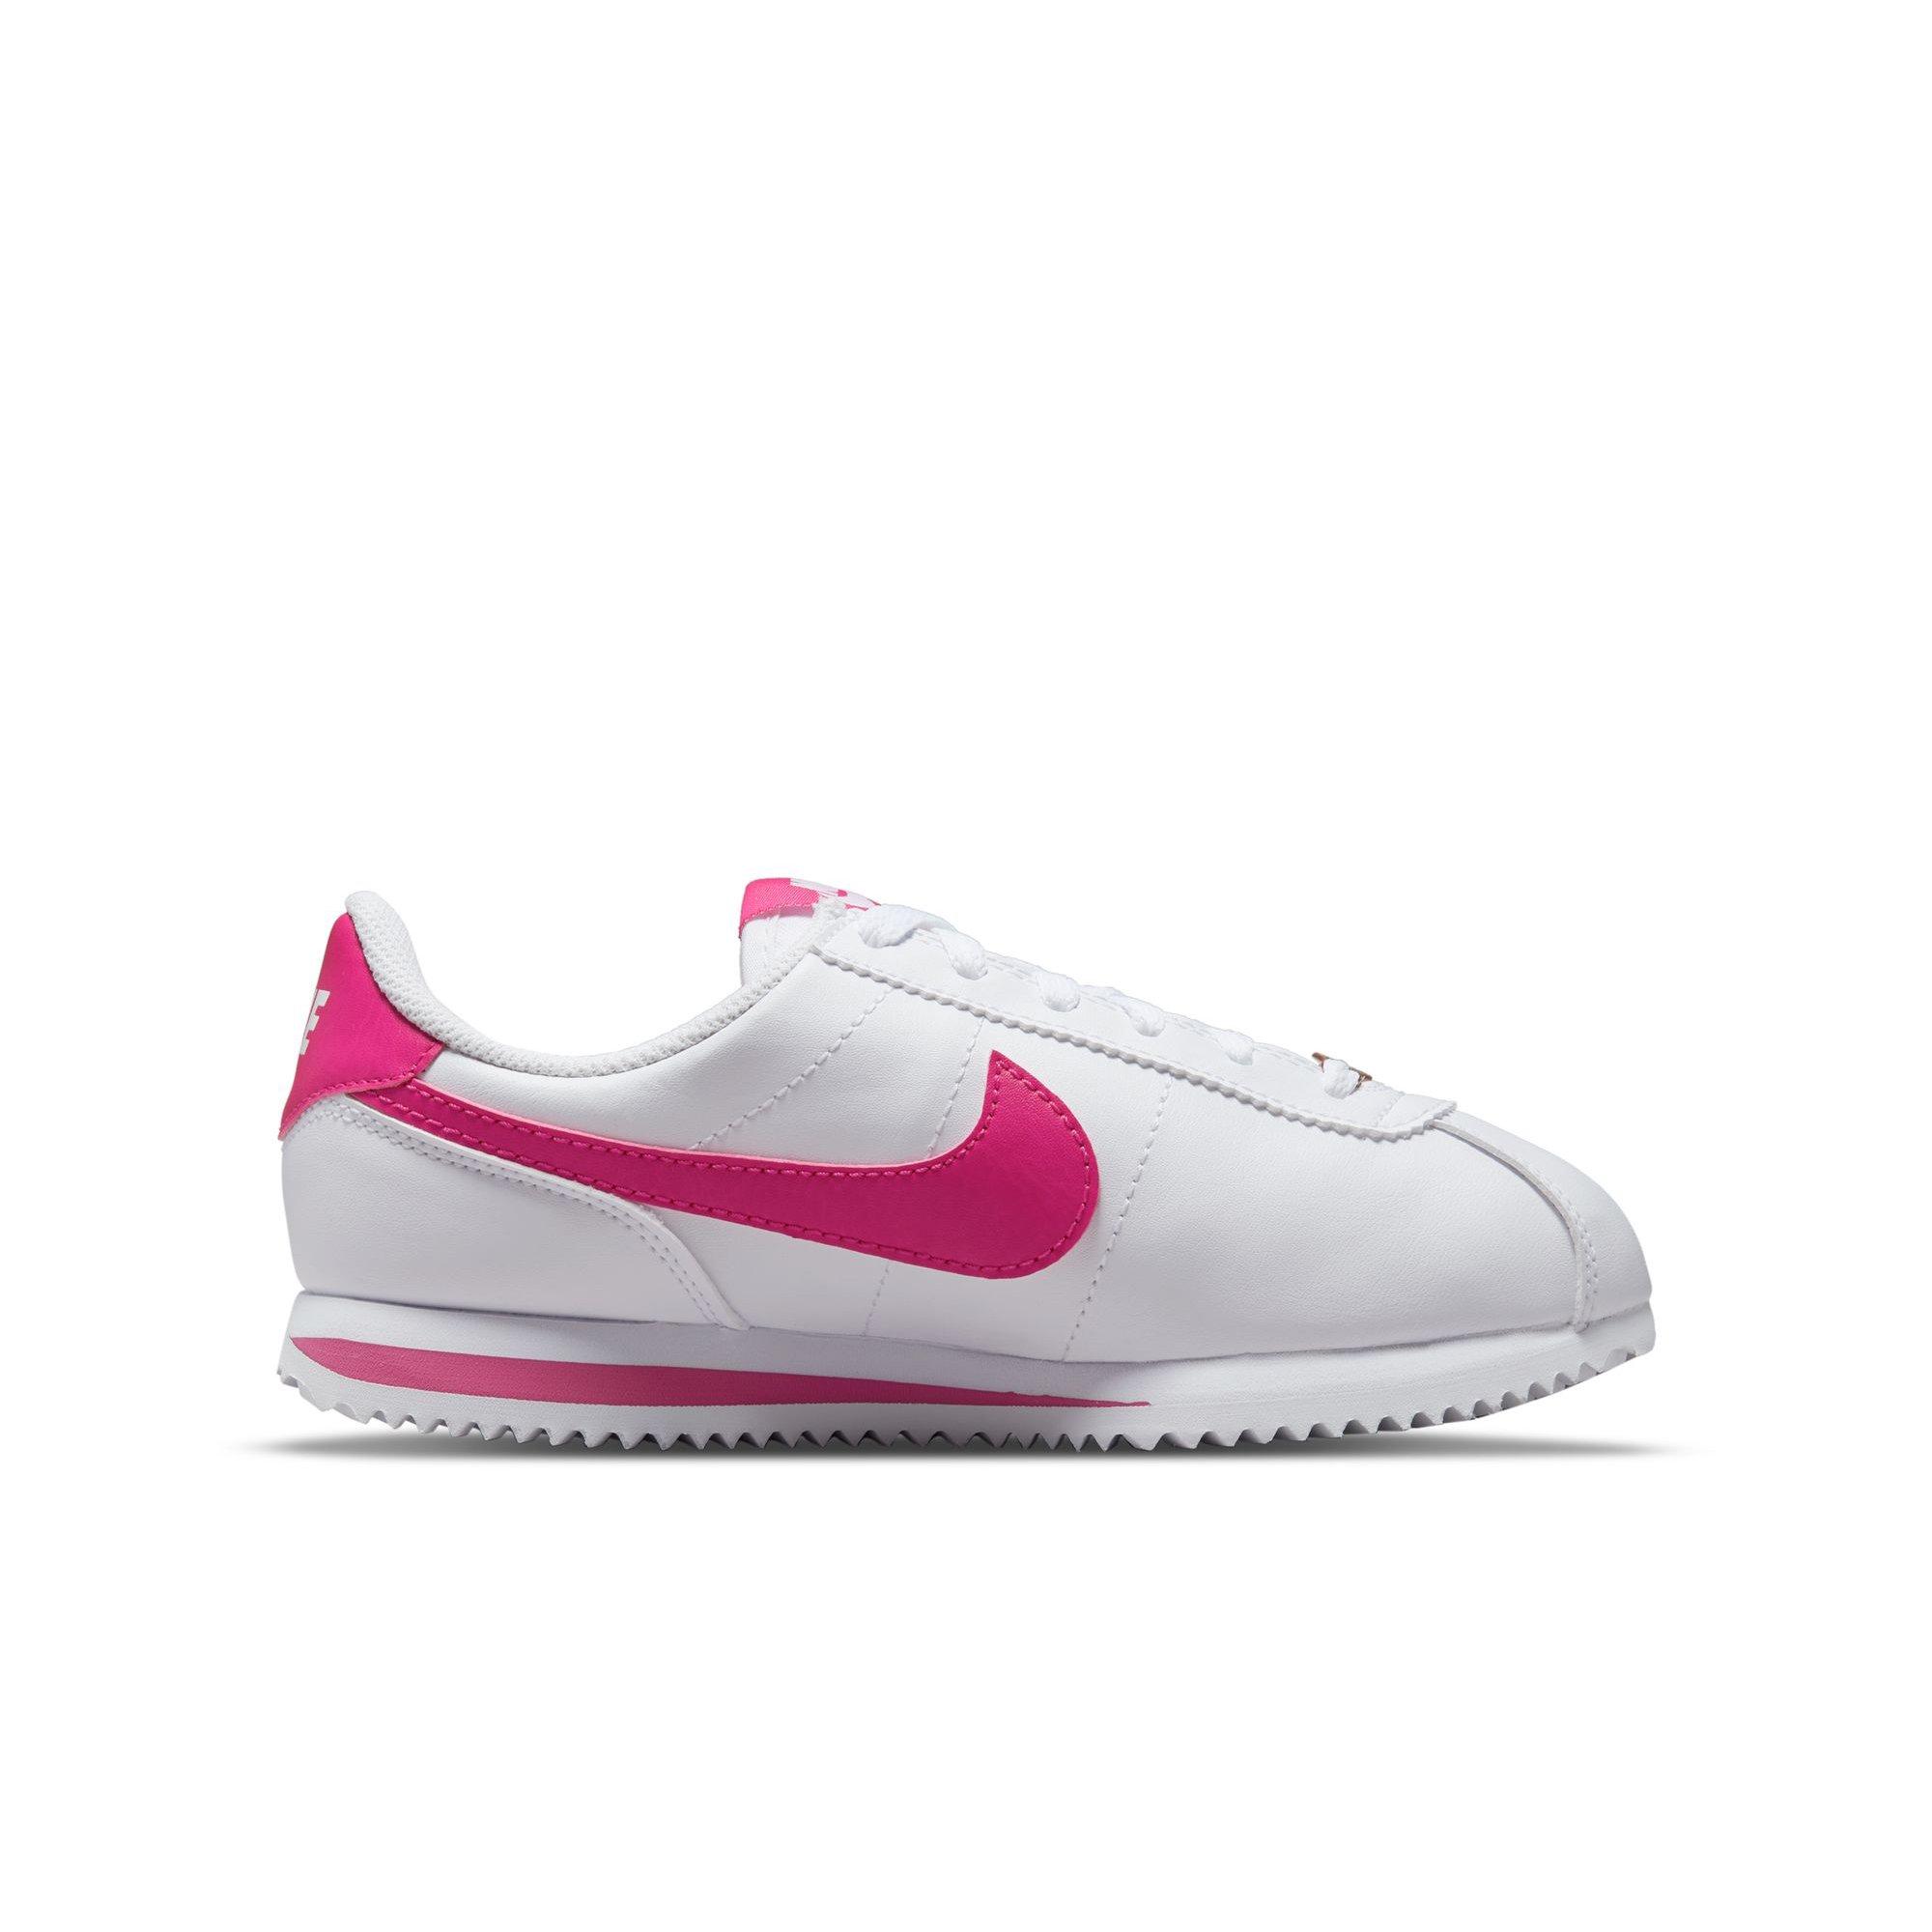 Nike Cortez Pink and Black Size 6.5